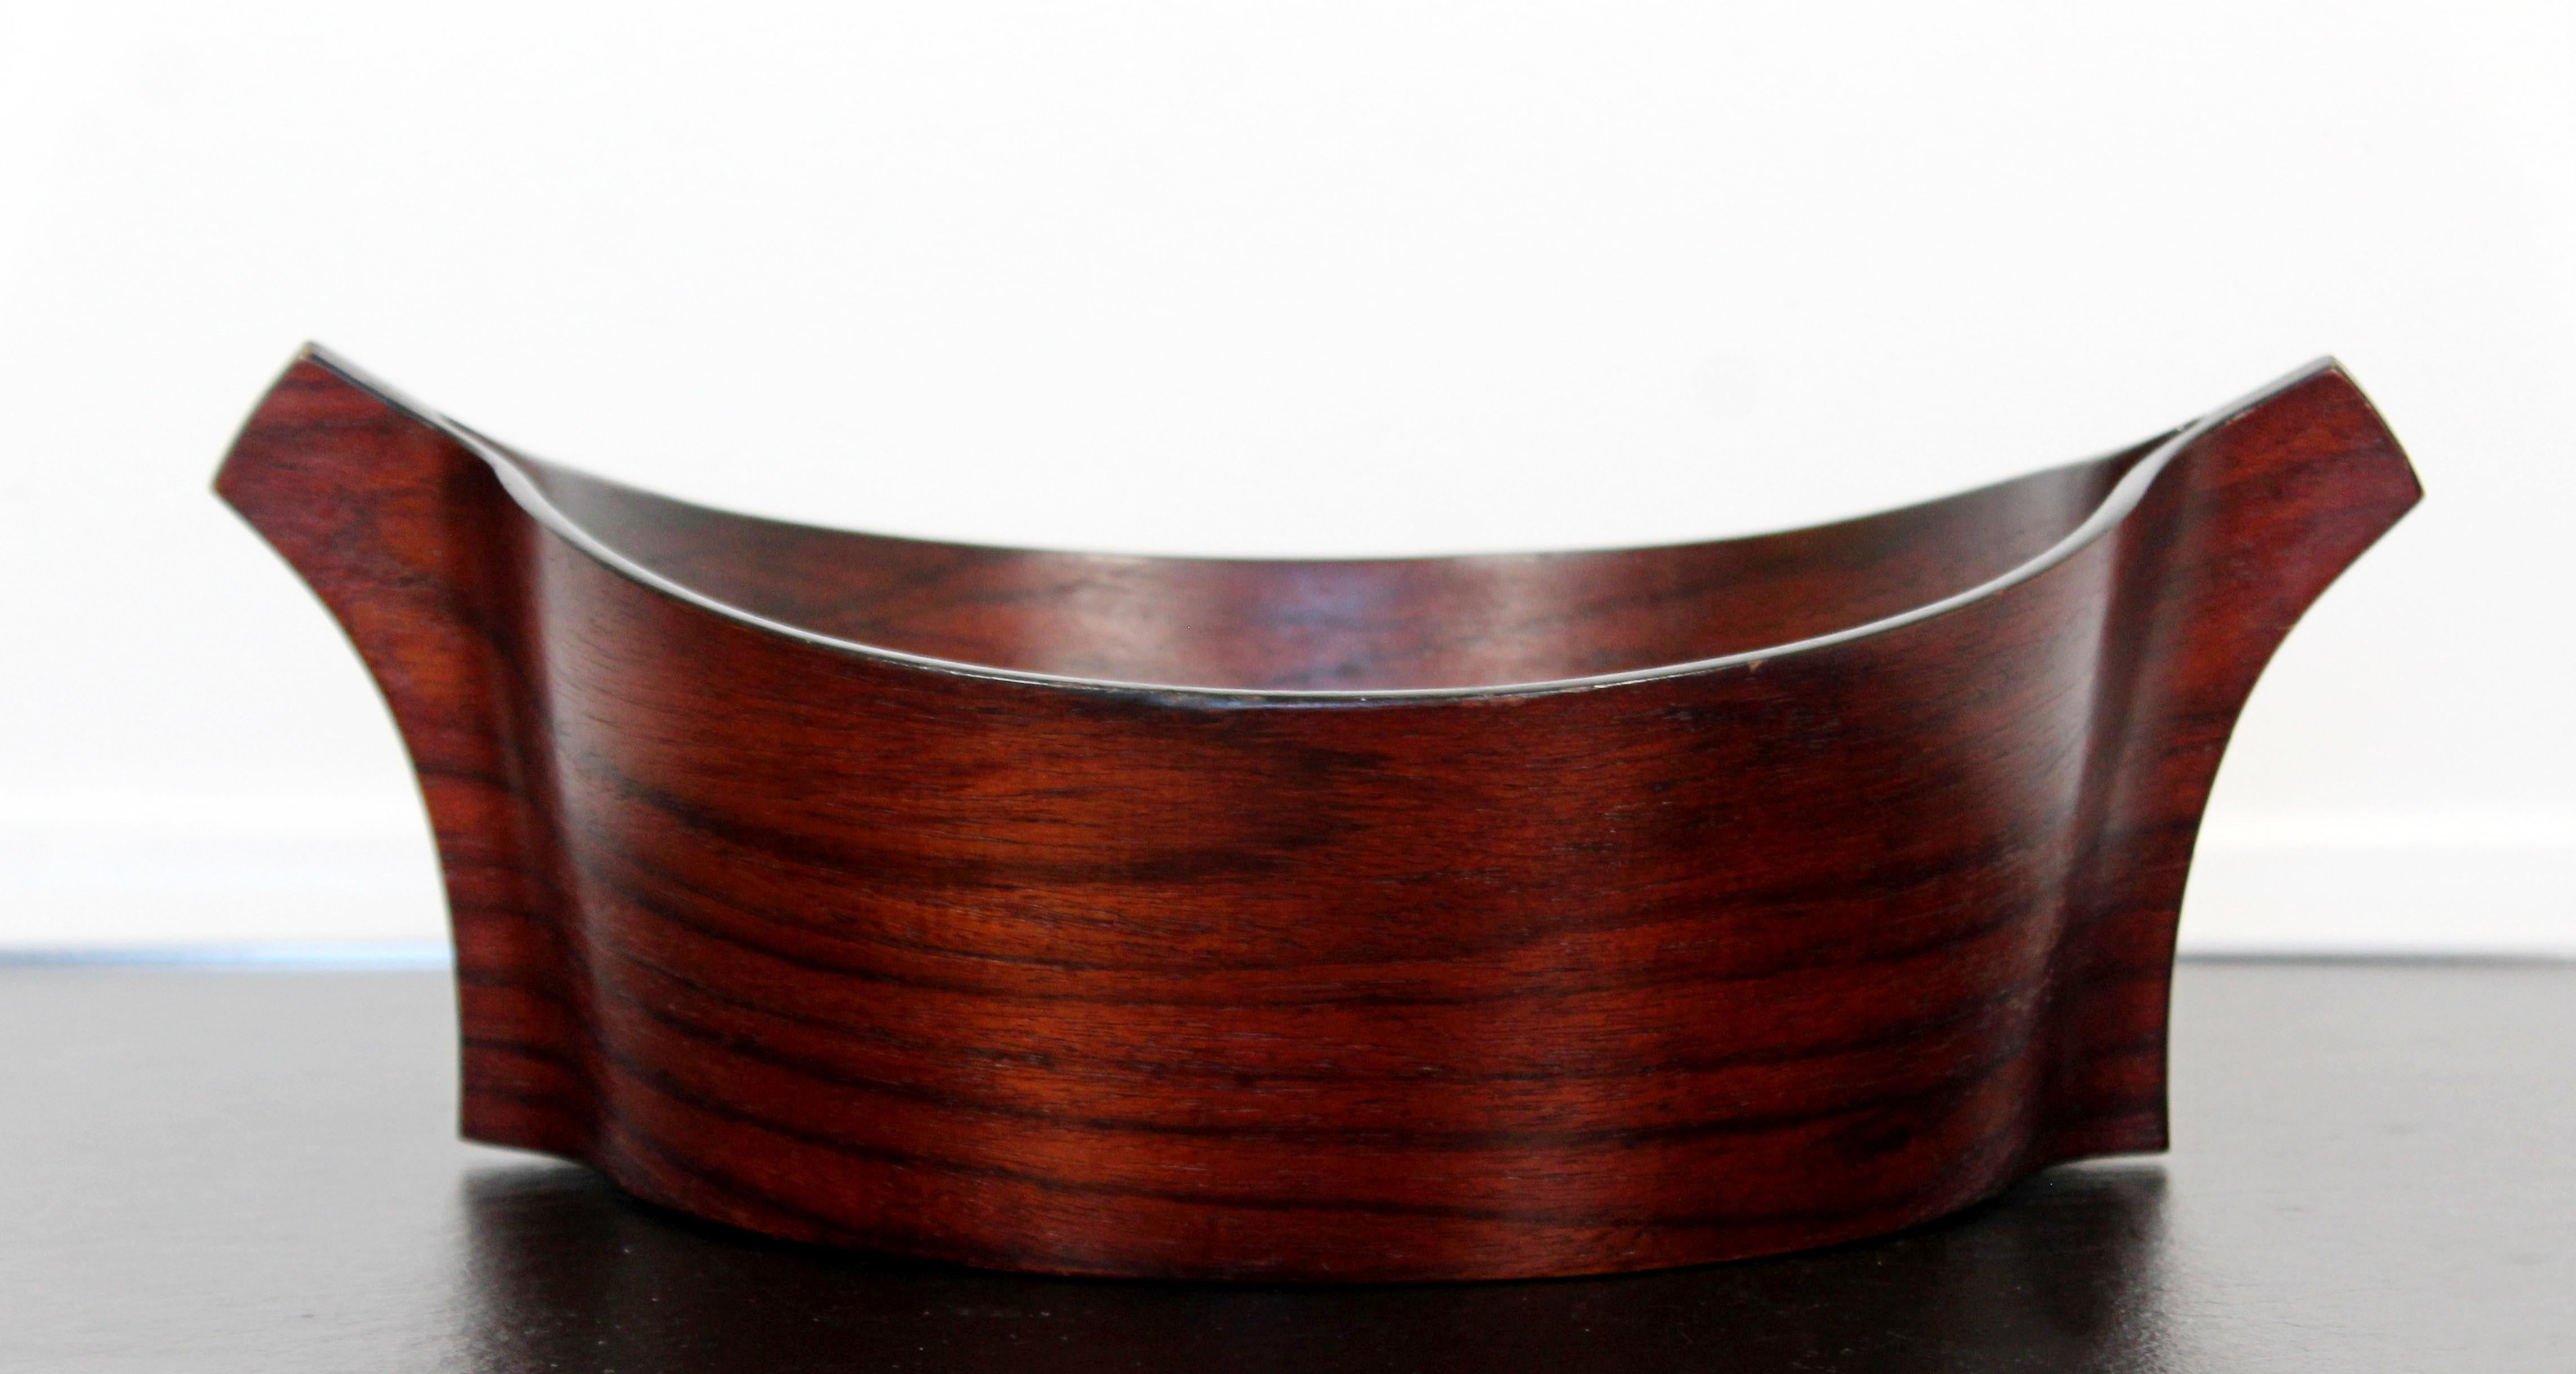 For your consideration is a fantastic art bowl, made of rosewood, by Jens Quistgaard for Dansk, circa 1960s. In very good condition. The dimensions are 15.5